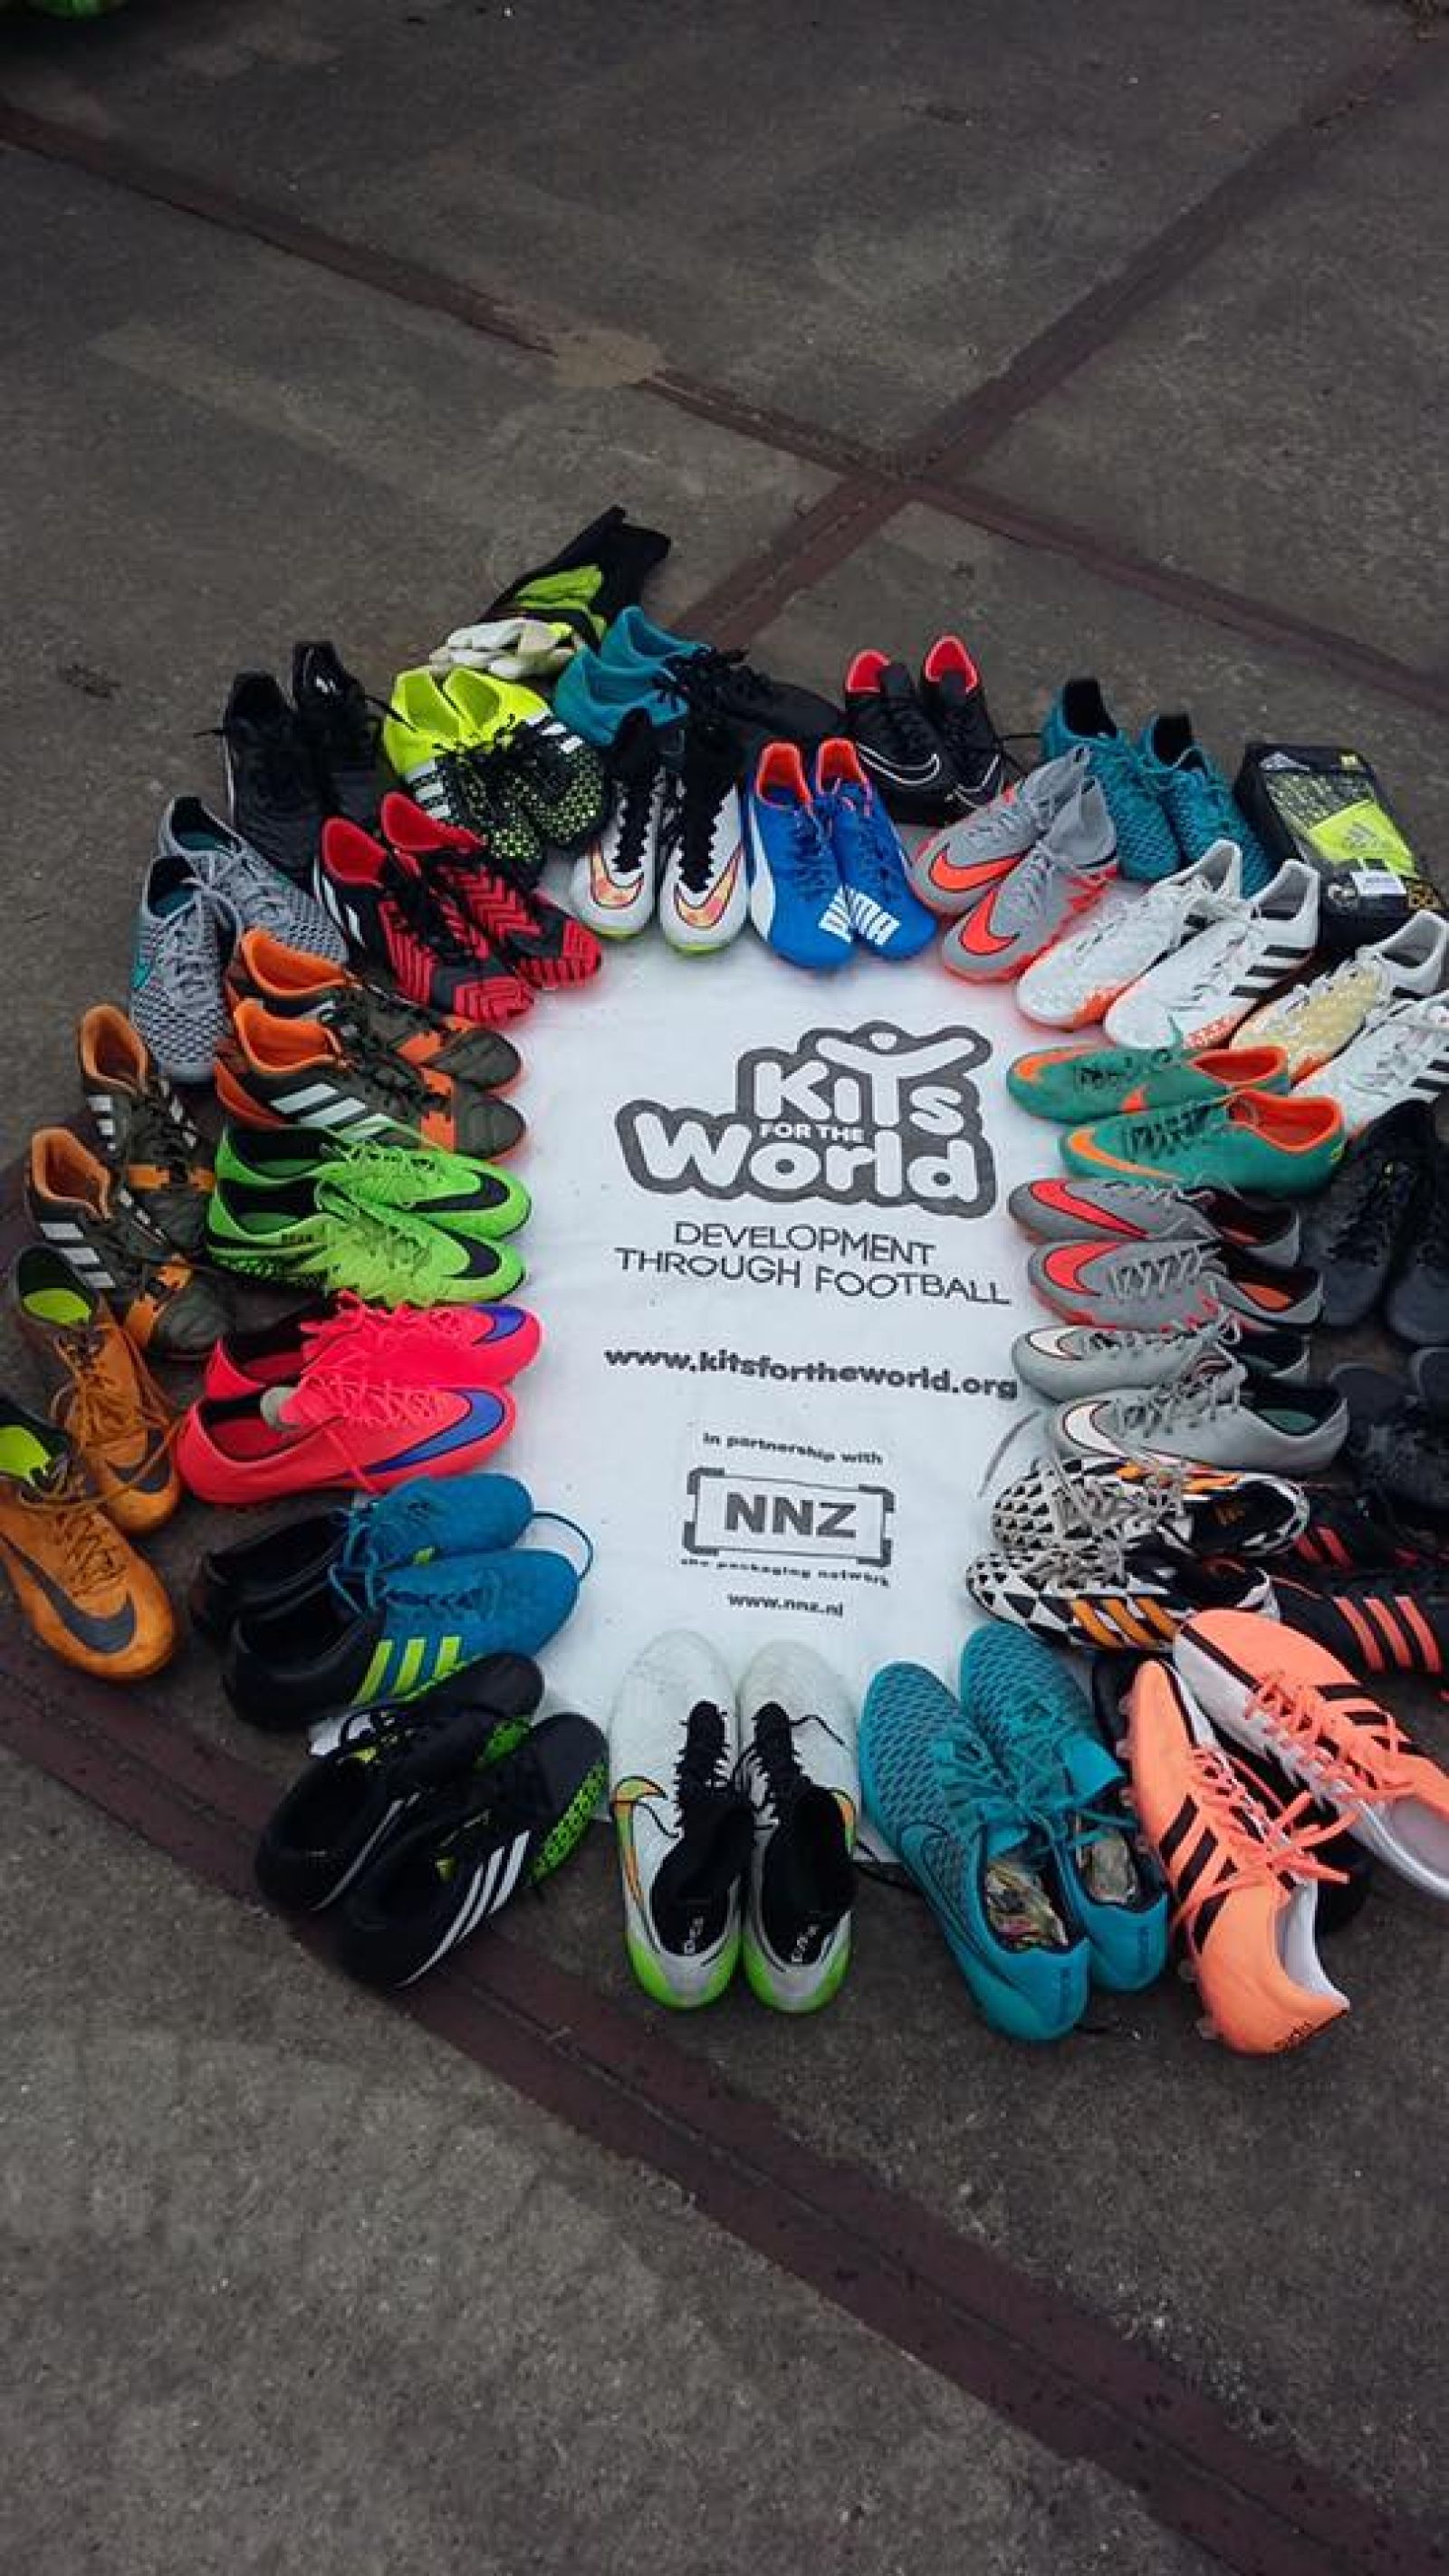 Donated football boots to kits for the world